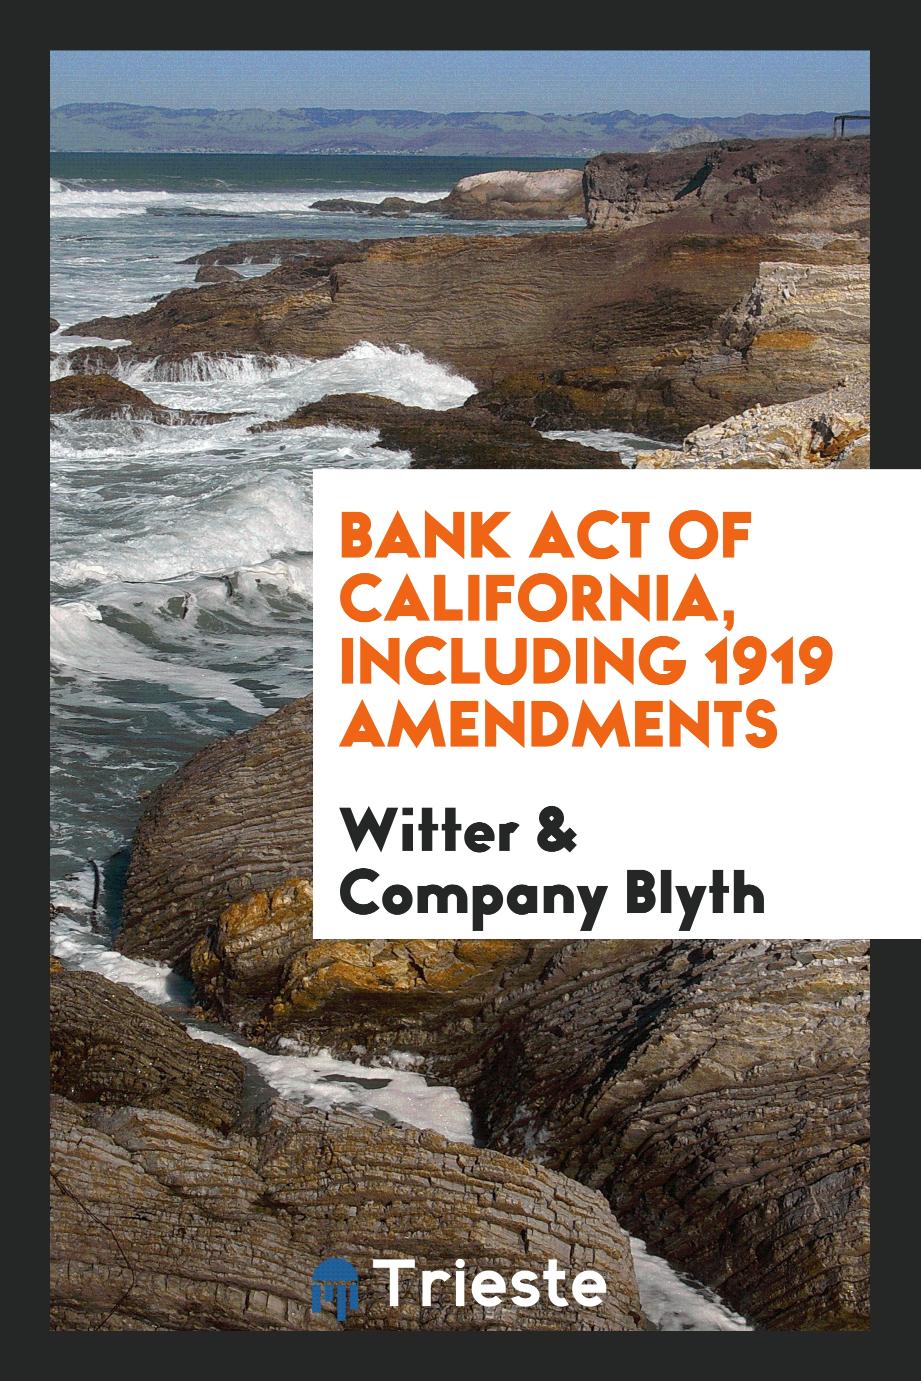 Witter & Company Blyth - Bank act of California, including 1919 amendments